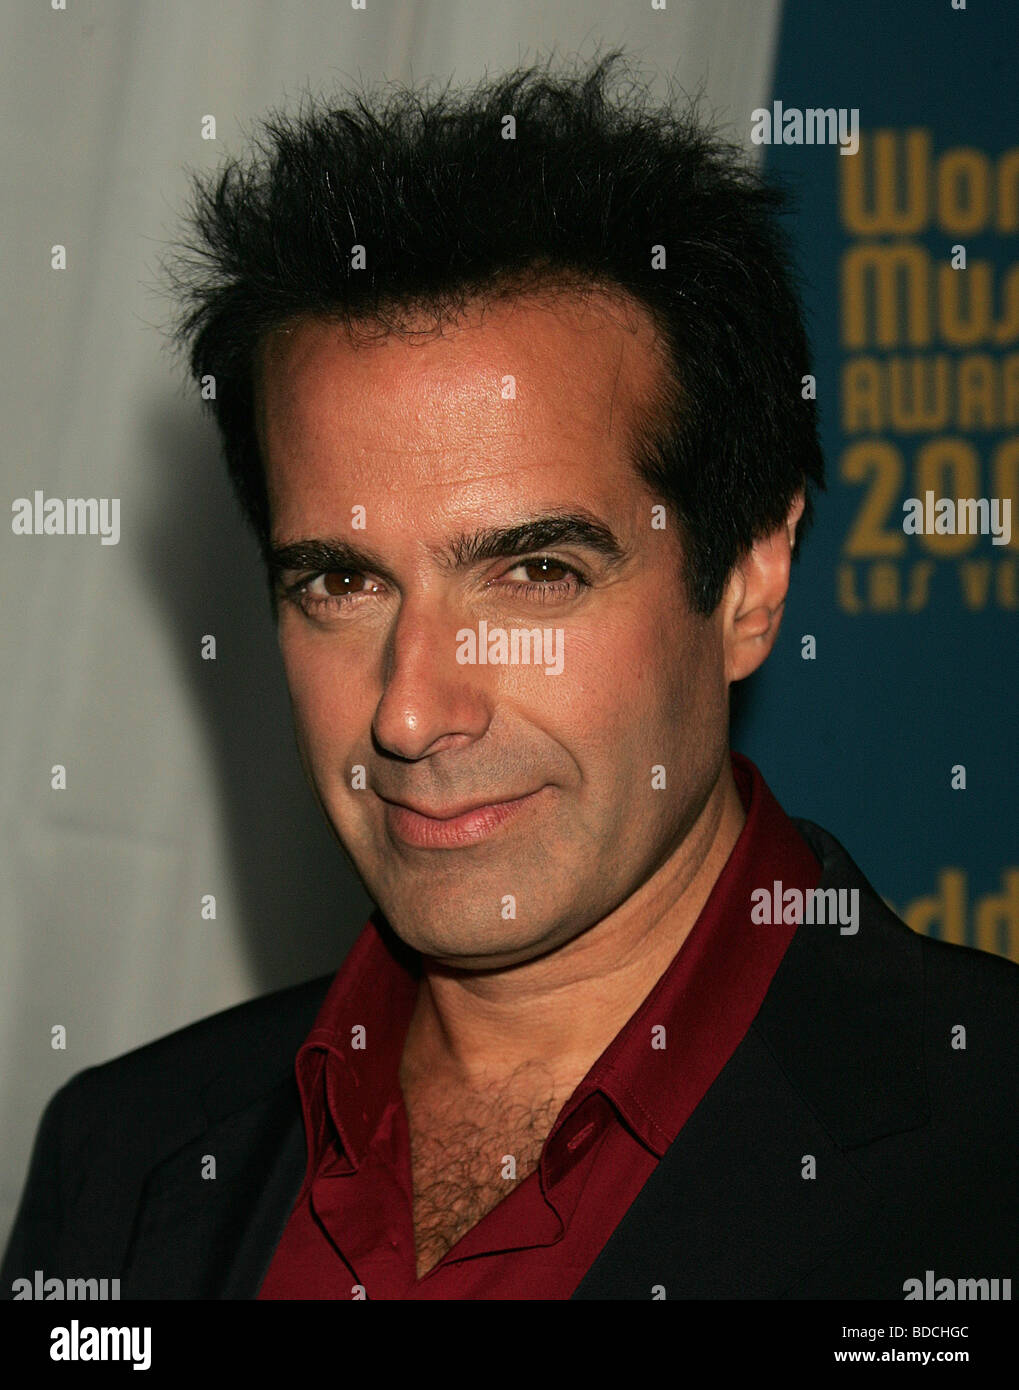 DAVID COPPERFIELD  - US magician about 2002 Stock Photo